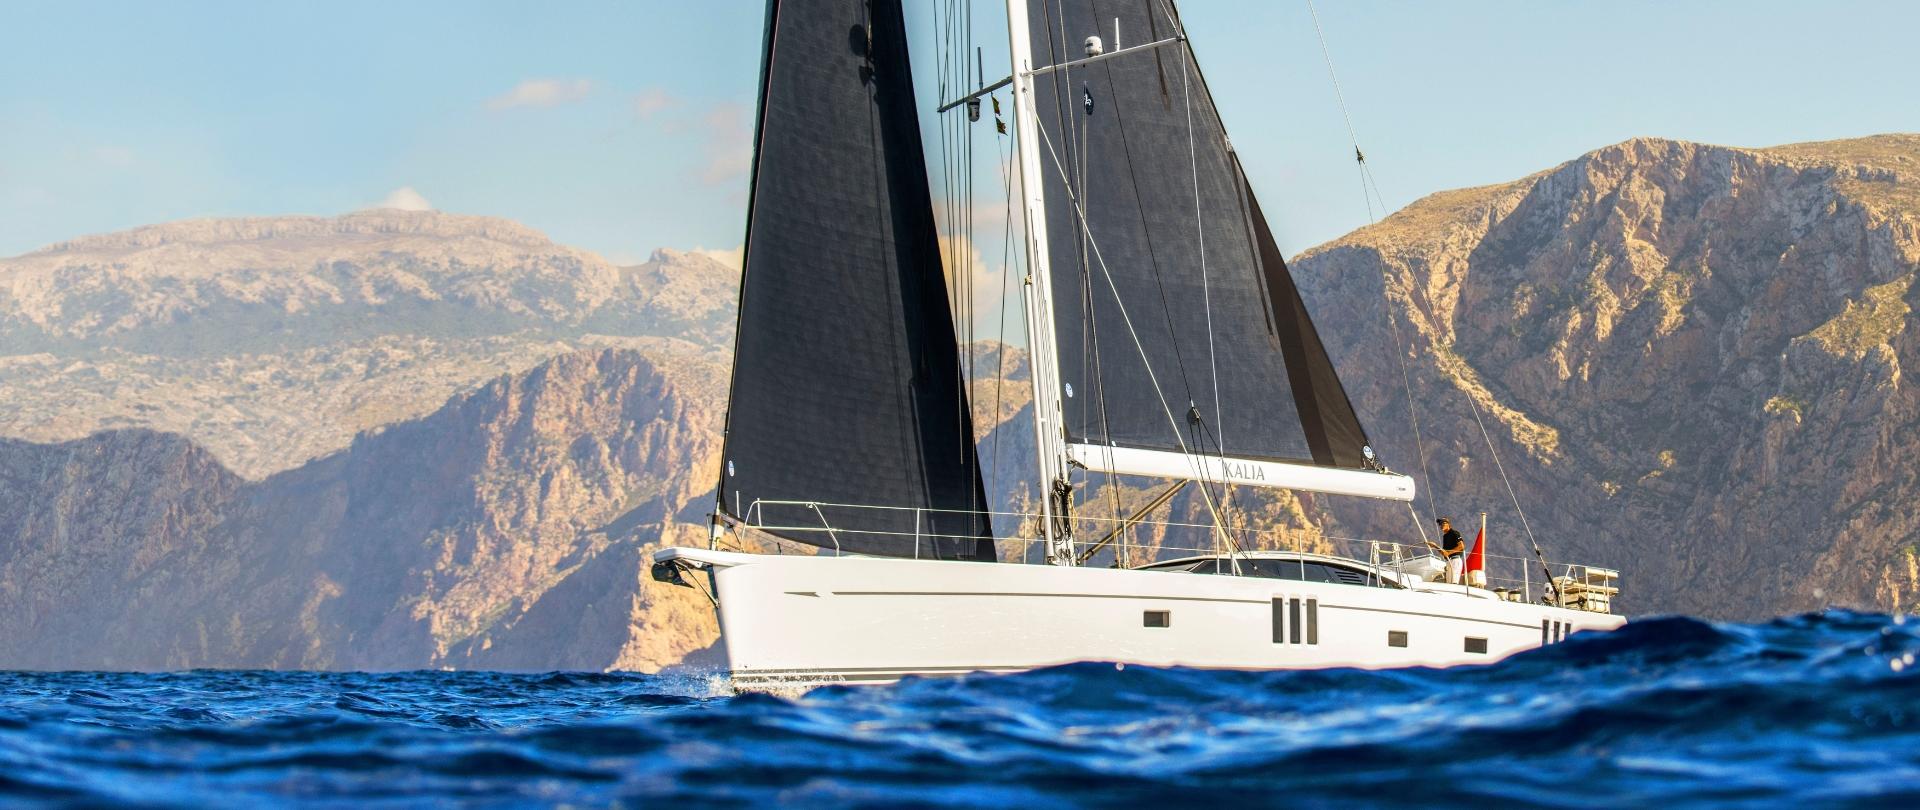 Luxury Sailing Yachts For Sale, New Sailing Boats